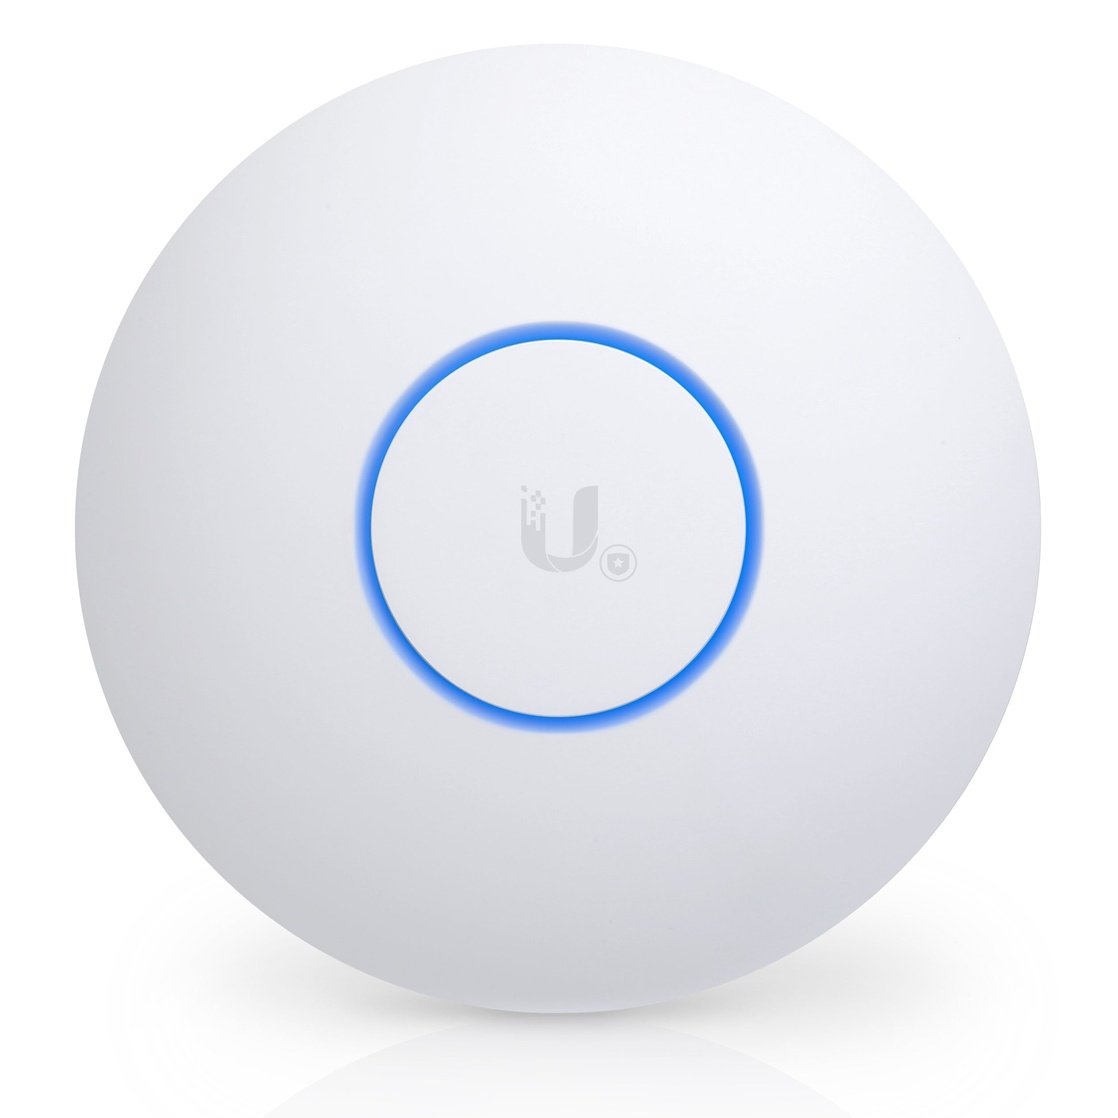 I5adbf404d9_66e3005d-b8c6-4bda-8df0-83fd7ee2a44e Ubiquiti Unifi Access Point NanoHD / Indoor / 2,4 & 5 GHz / AC Wave 2 / 4x4 MIMO / UAP-NanoHD-3 / 3er Pack Accesspoint ubiquiti WIFI wifi 6 router